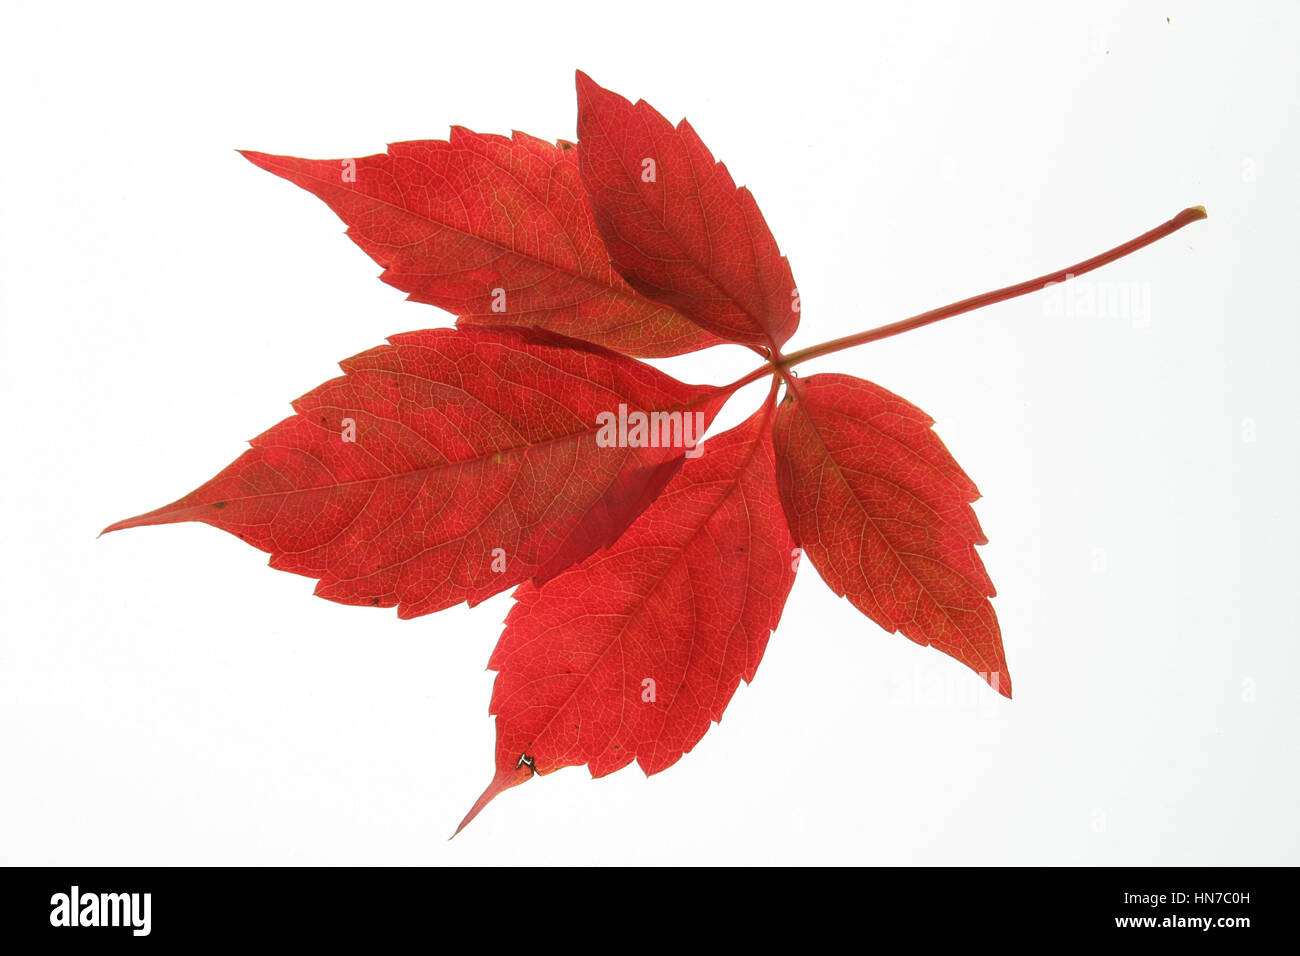 Virginia Creeper in Autumn - slingle red leaf against white background Stock Photo